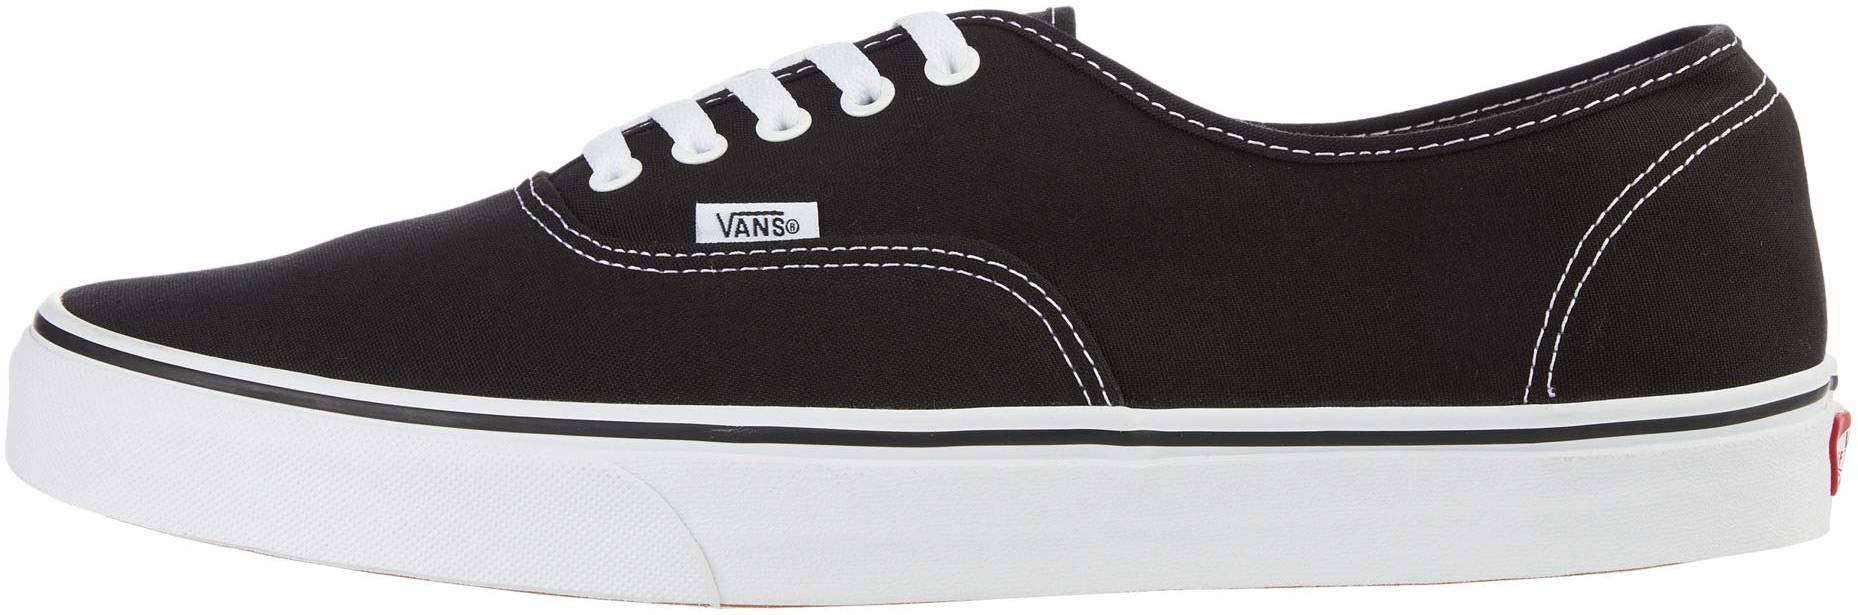 30+ colors of Vans Authentic (from $31) | RunRepeat غرف بالساعة